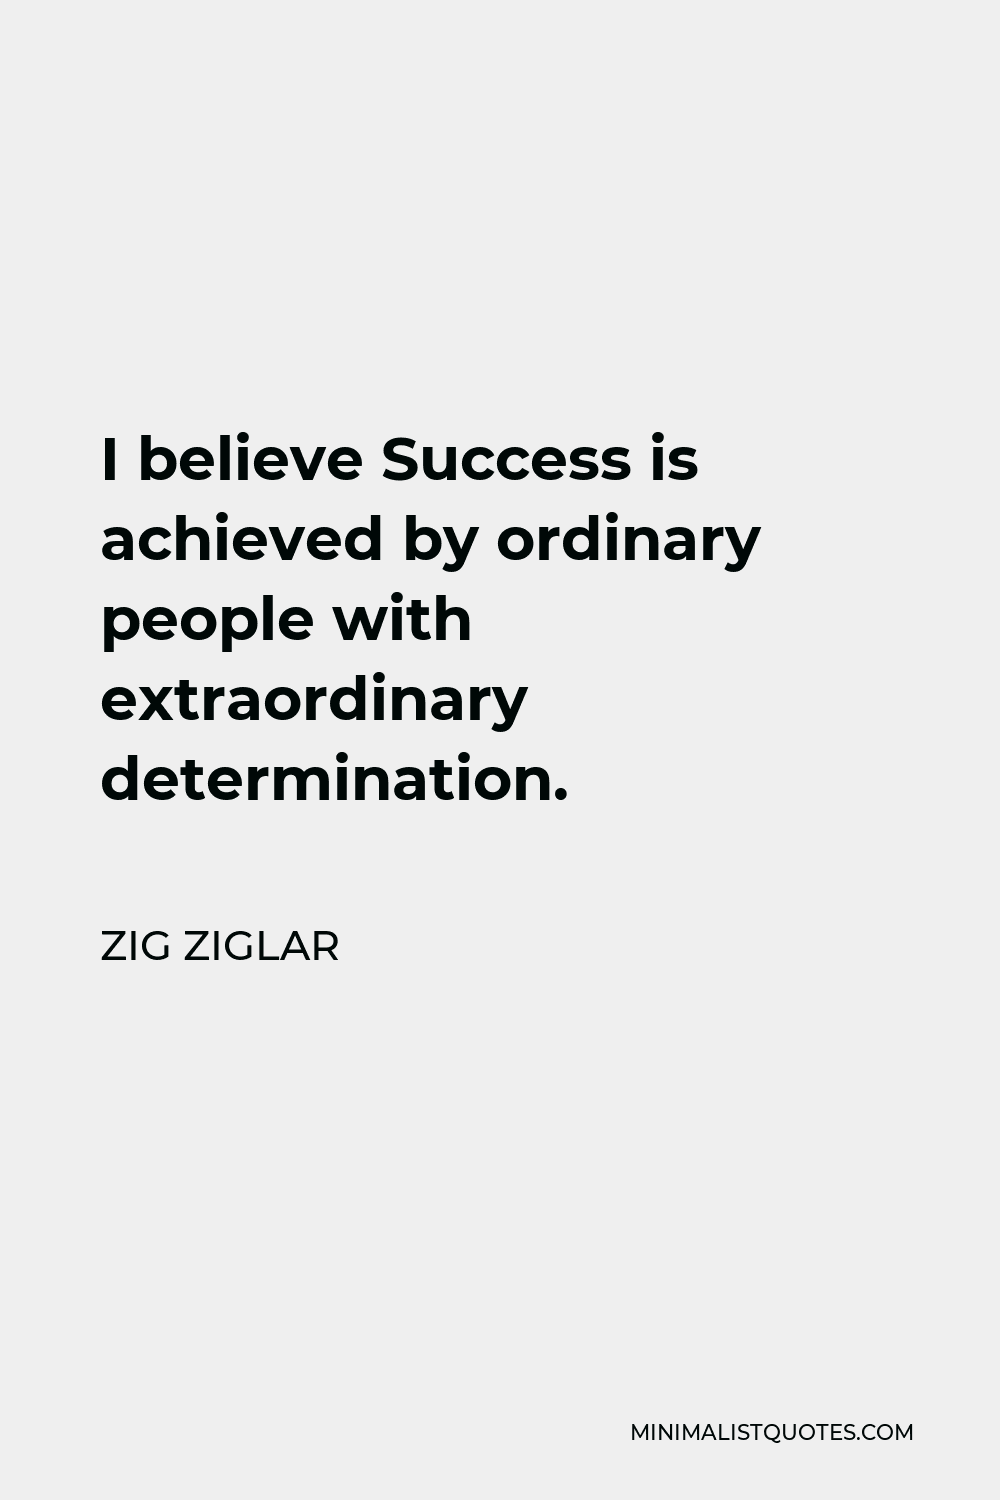 Zig Ziglar Quote - I believe Success is achieved by ordinary people with extraordinary determination.